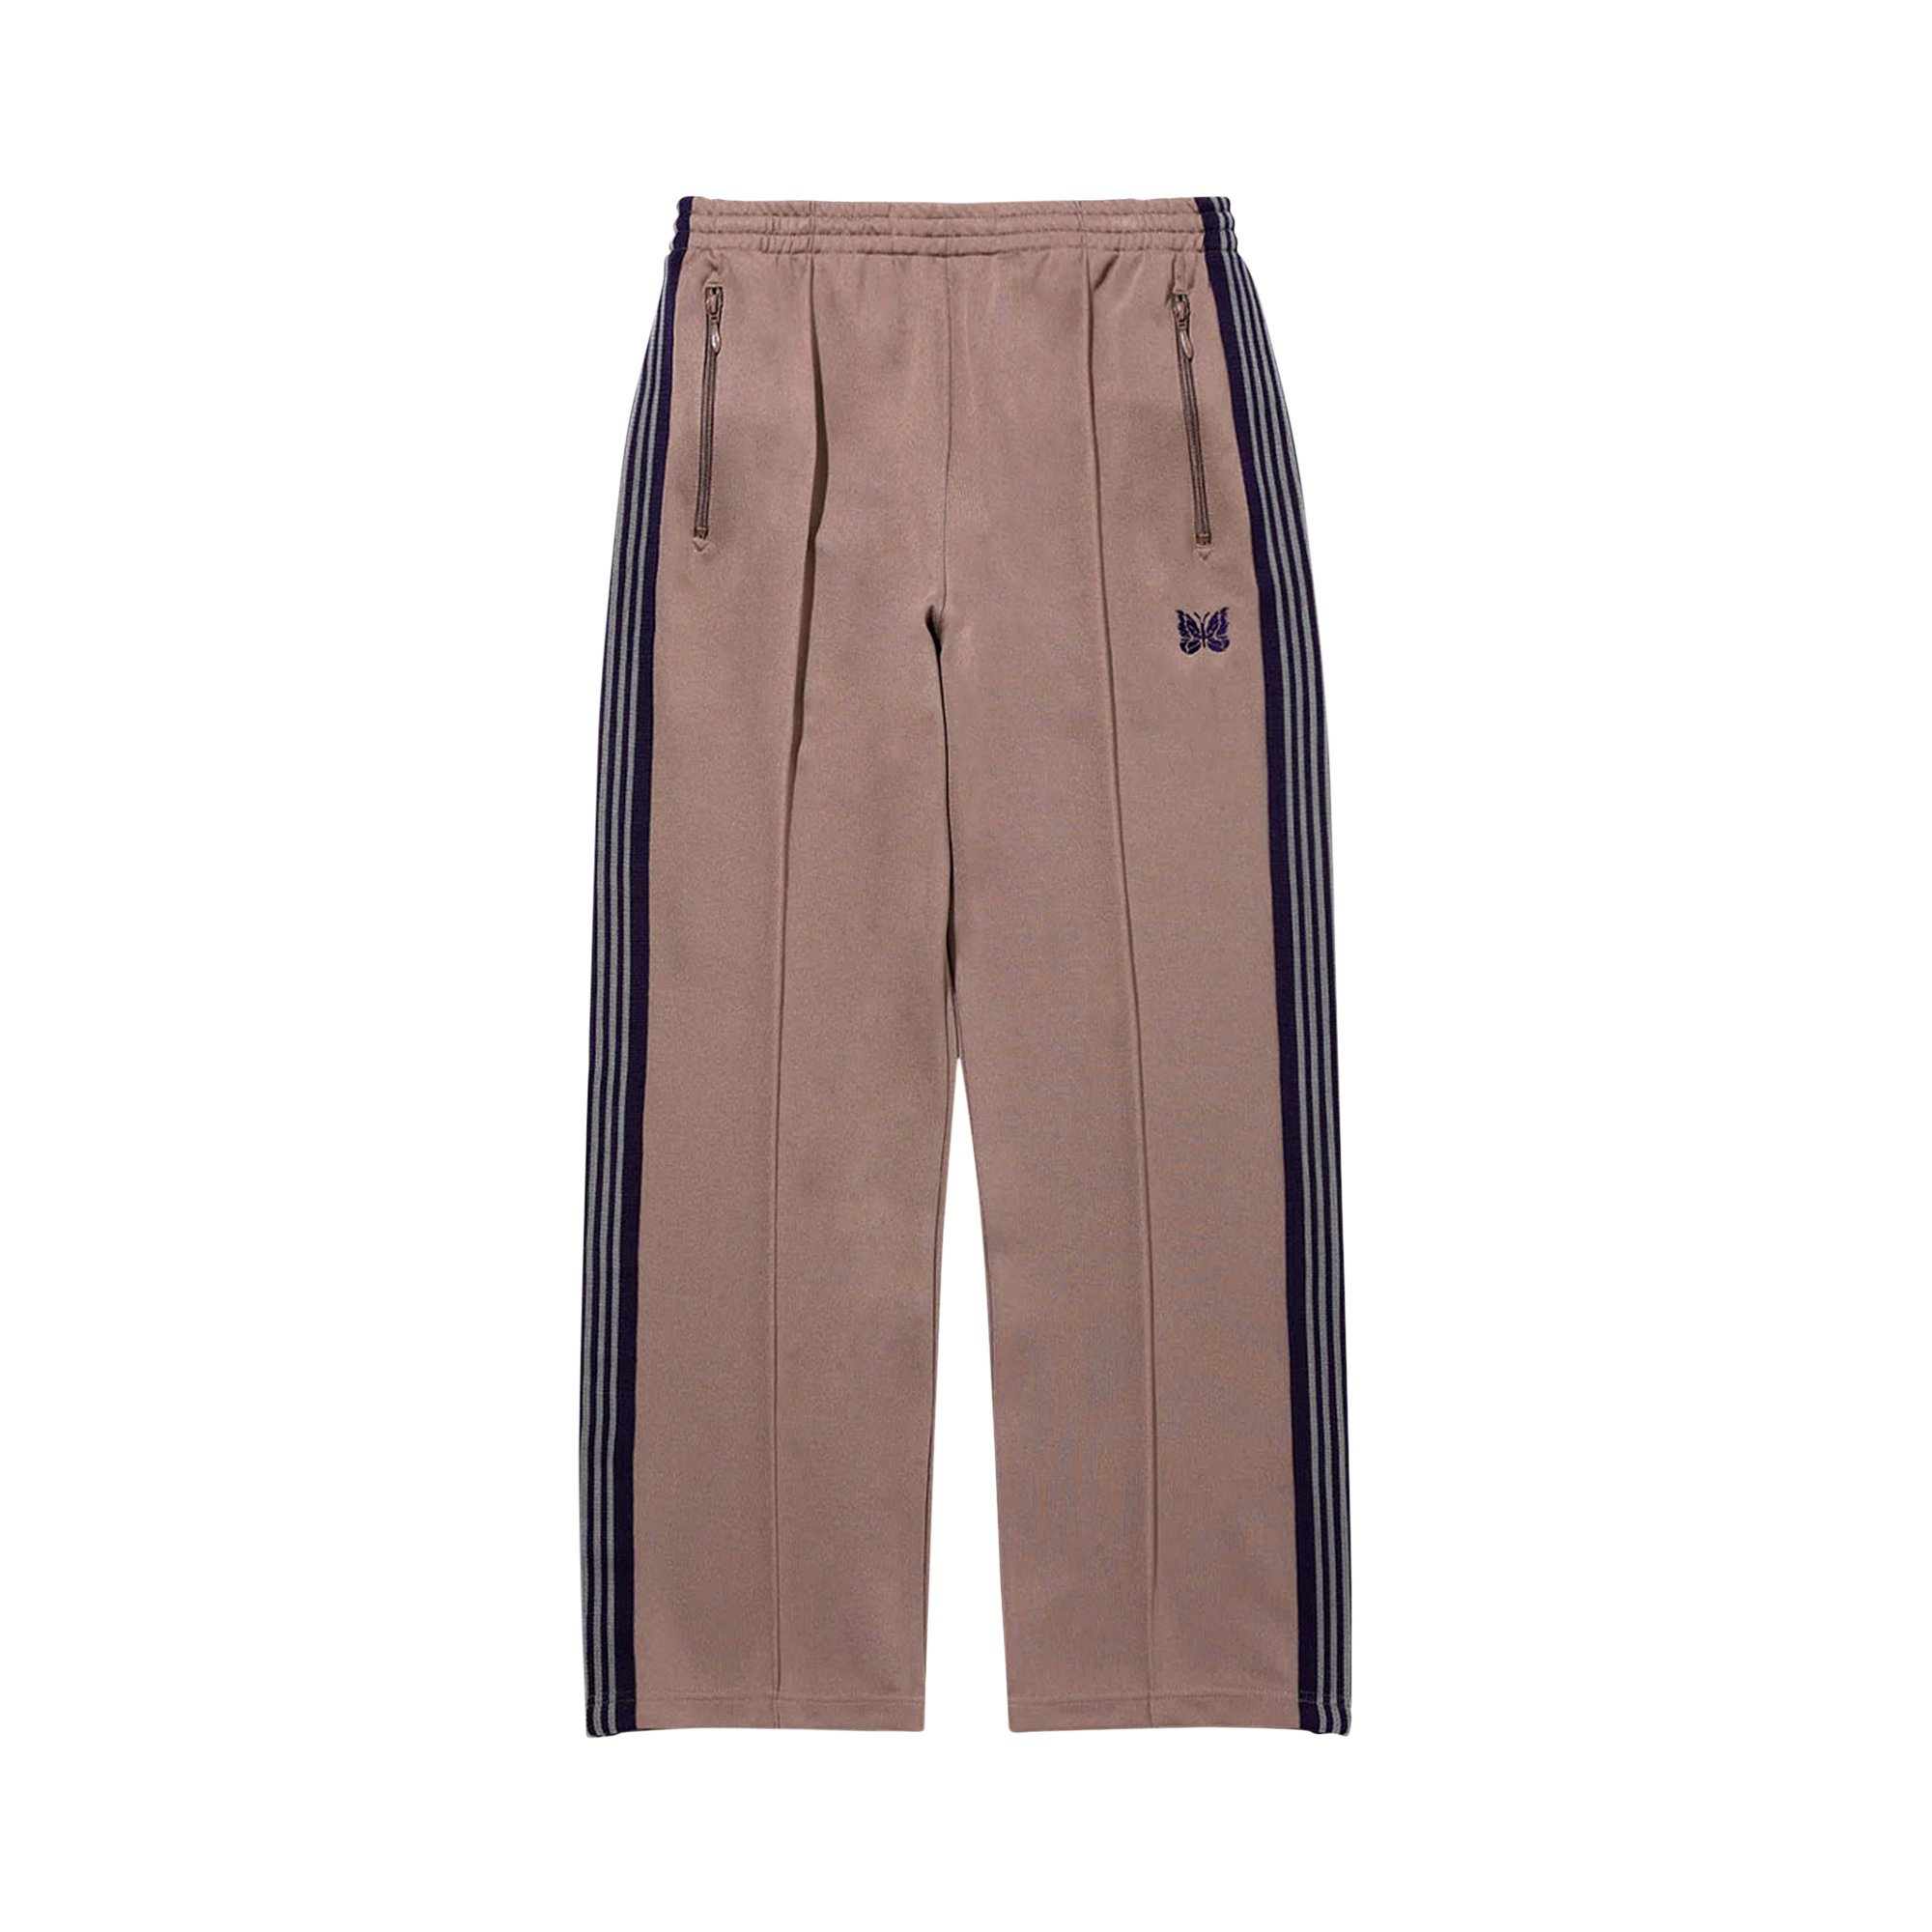 Buy Needles Track Pant 'Taupe' - LQ229 TAUP | GOAT